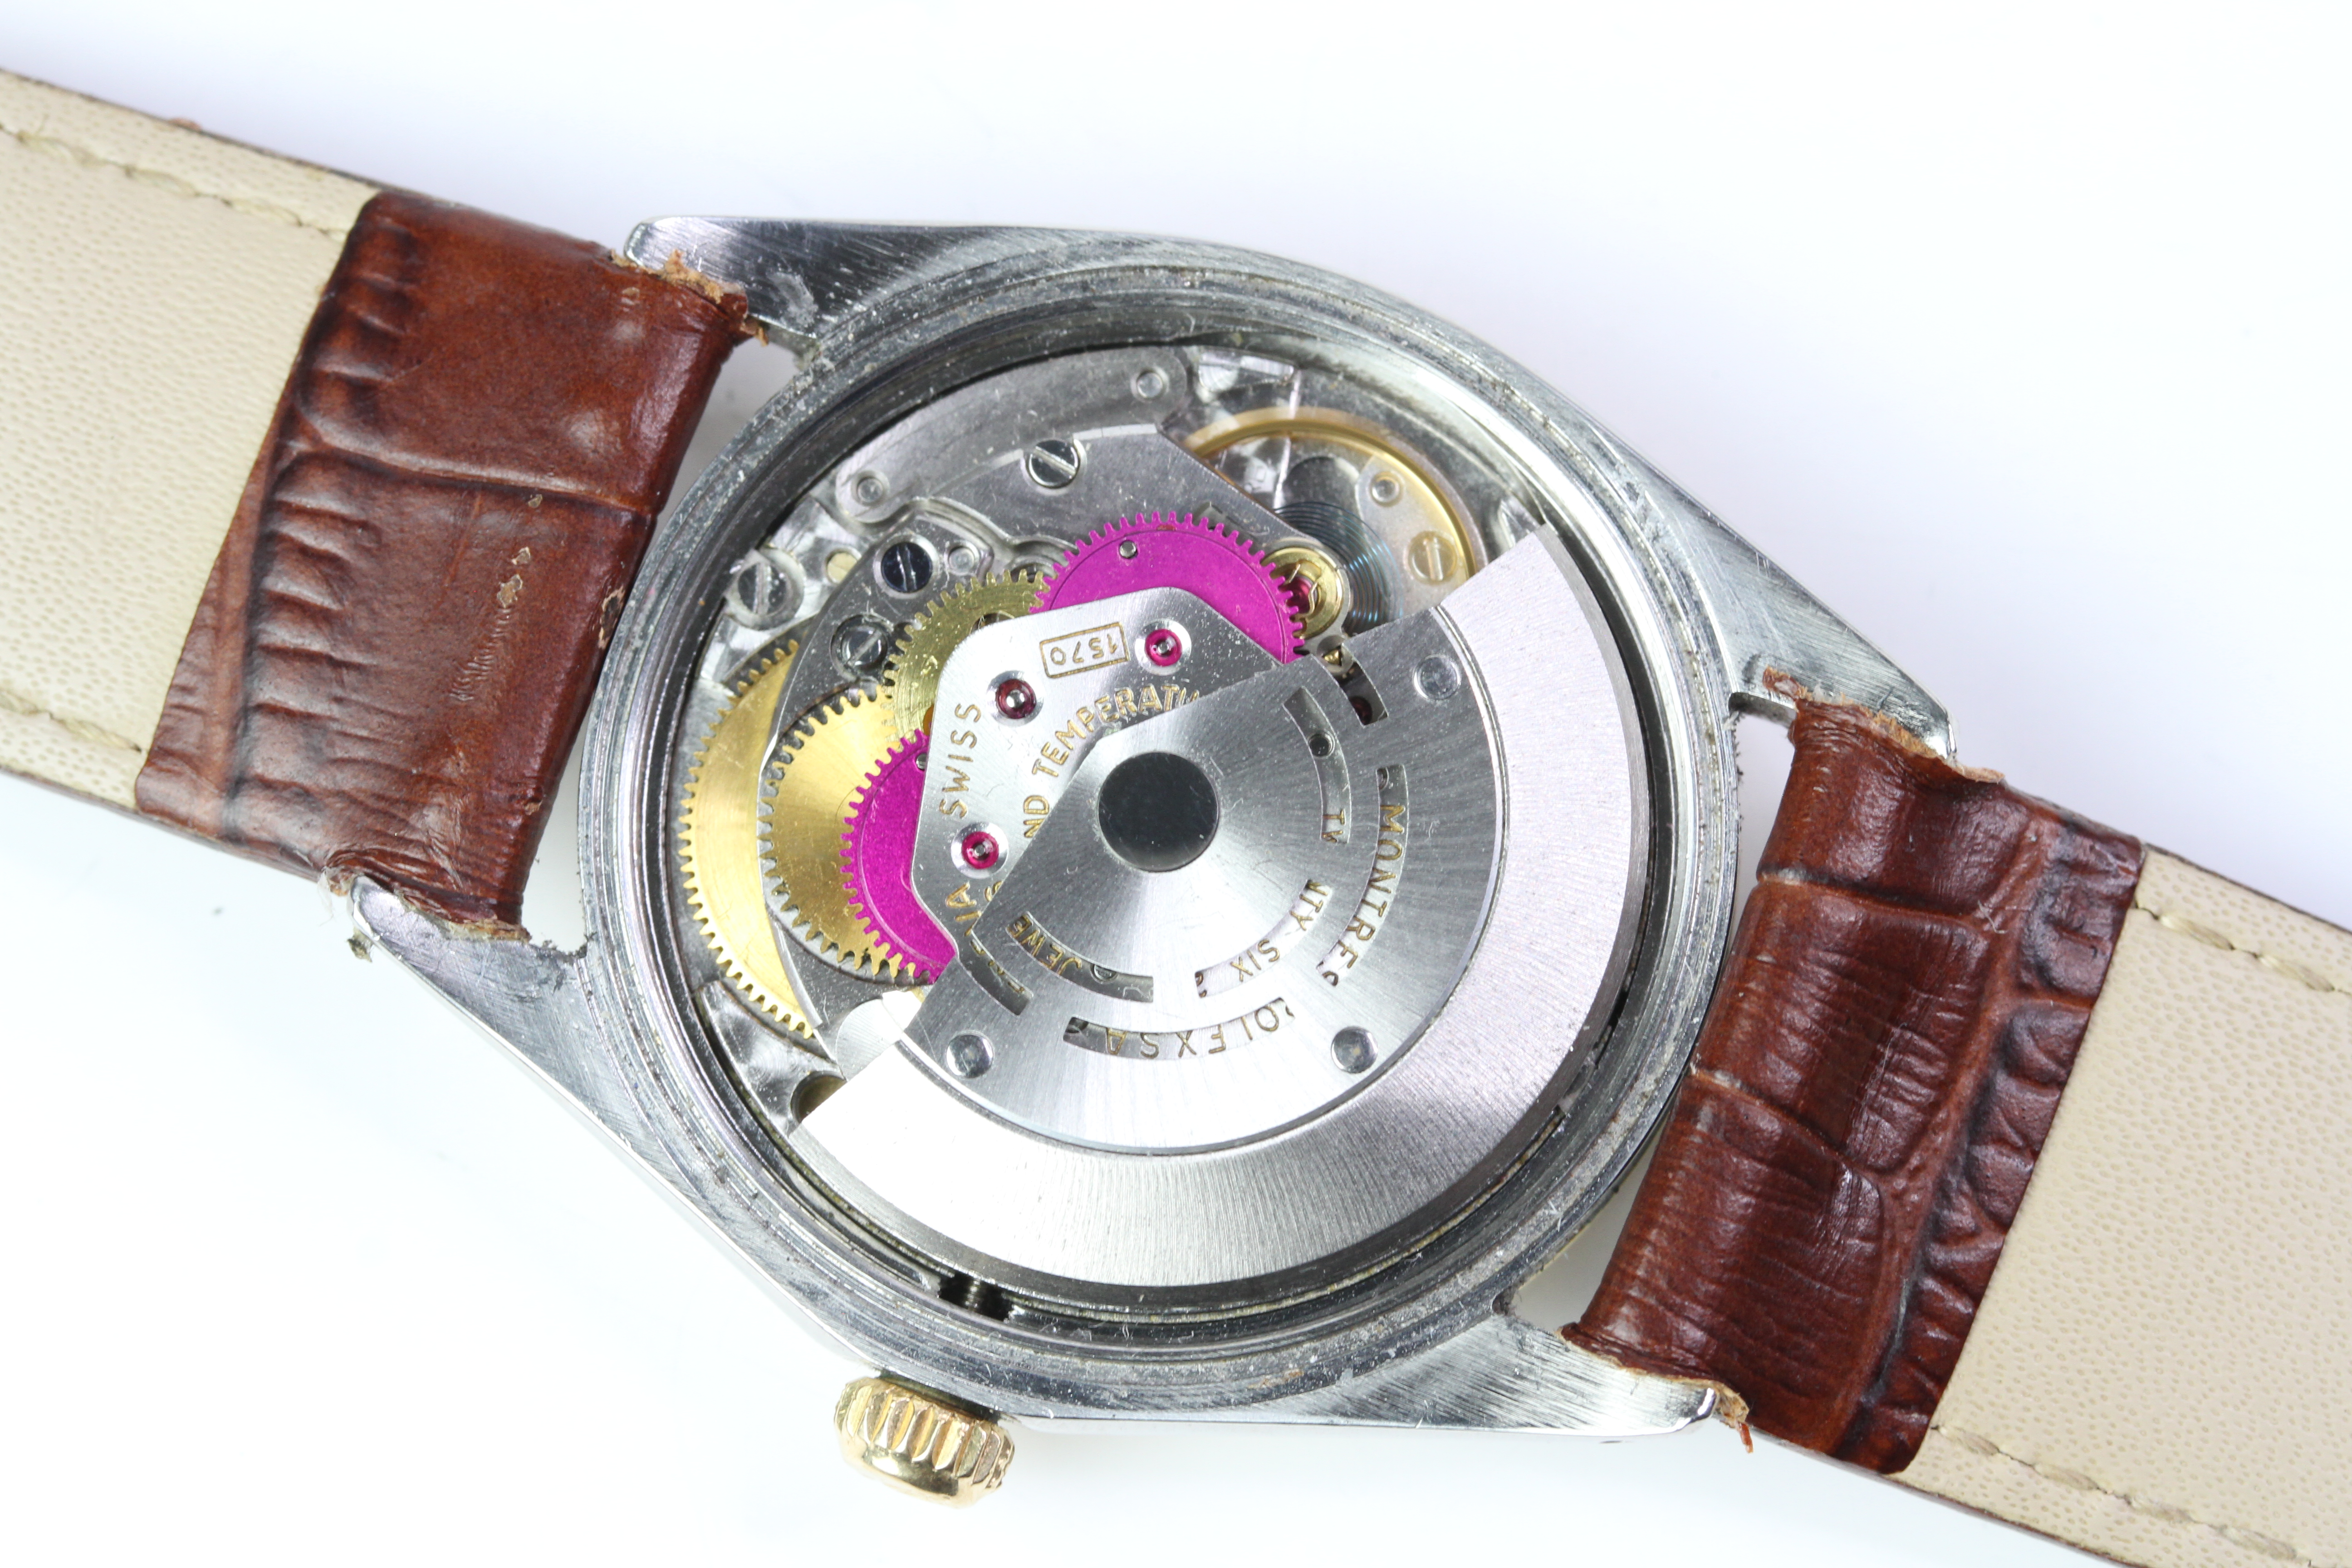 VINTAGE ROLEX OYSTER PERPETUAL 'ZEPHYR' DIAL REFERENCE 1038 CIRCA 1972, champagne quartered 'Zephyr' - Image 4 of 6